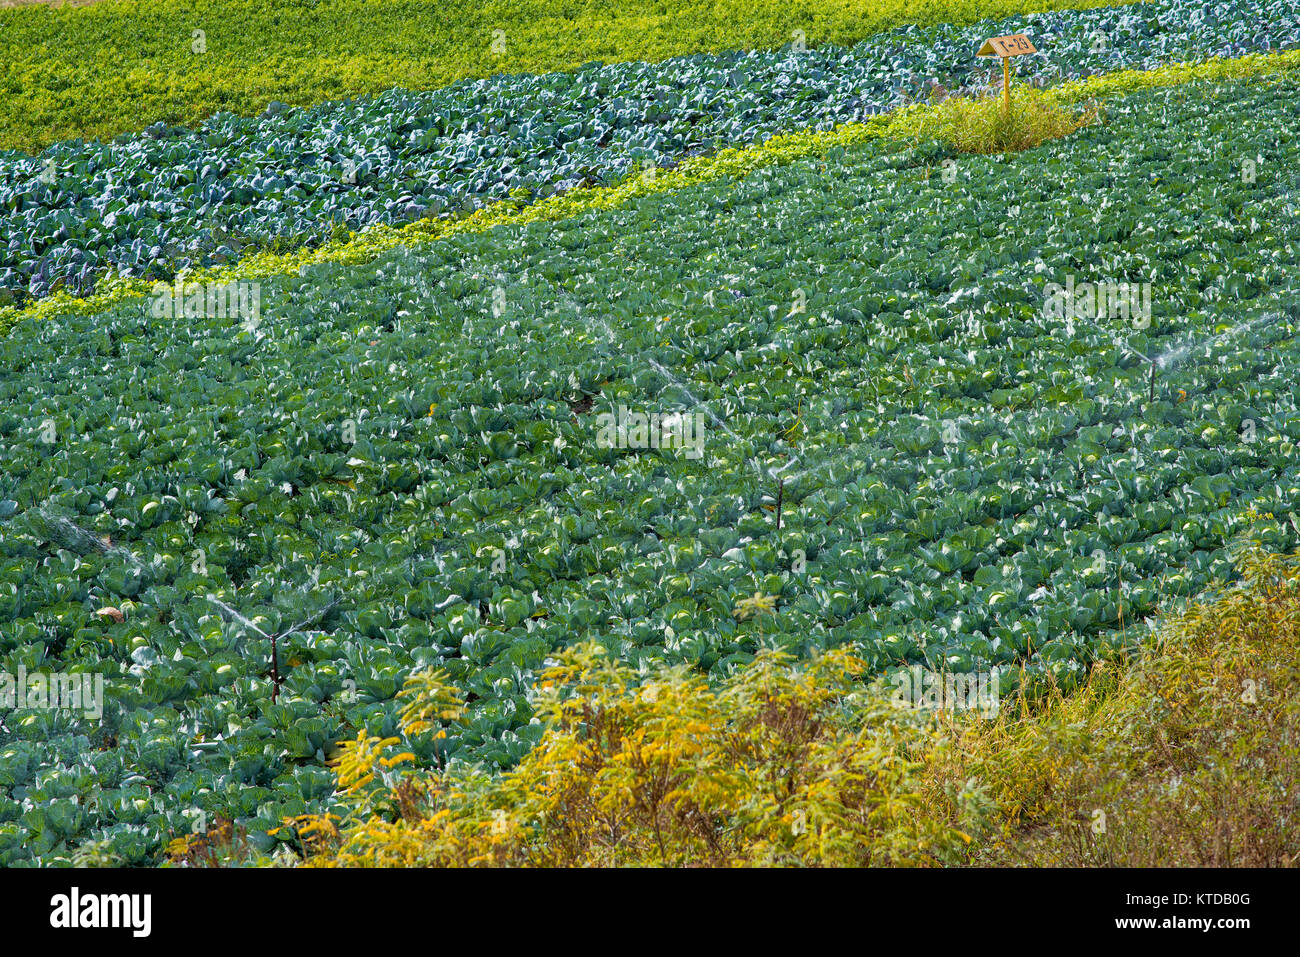 Agricultural irrigation system for watering cabbage field Stock Photo